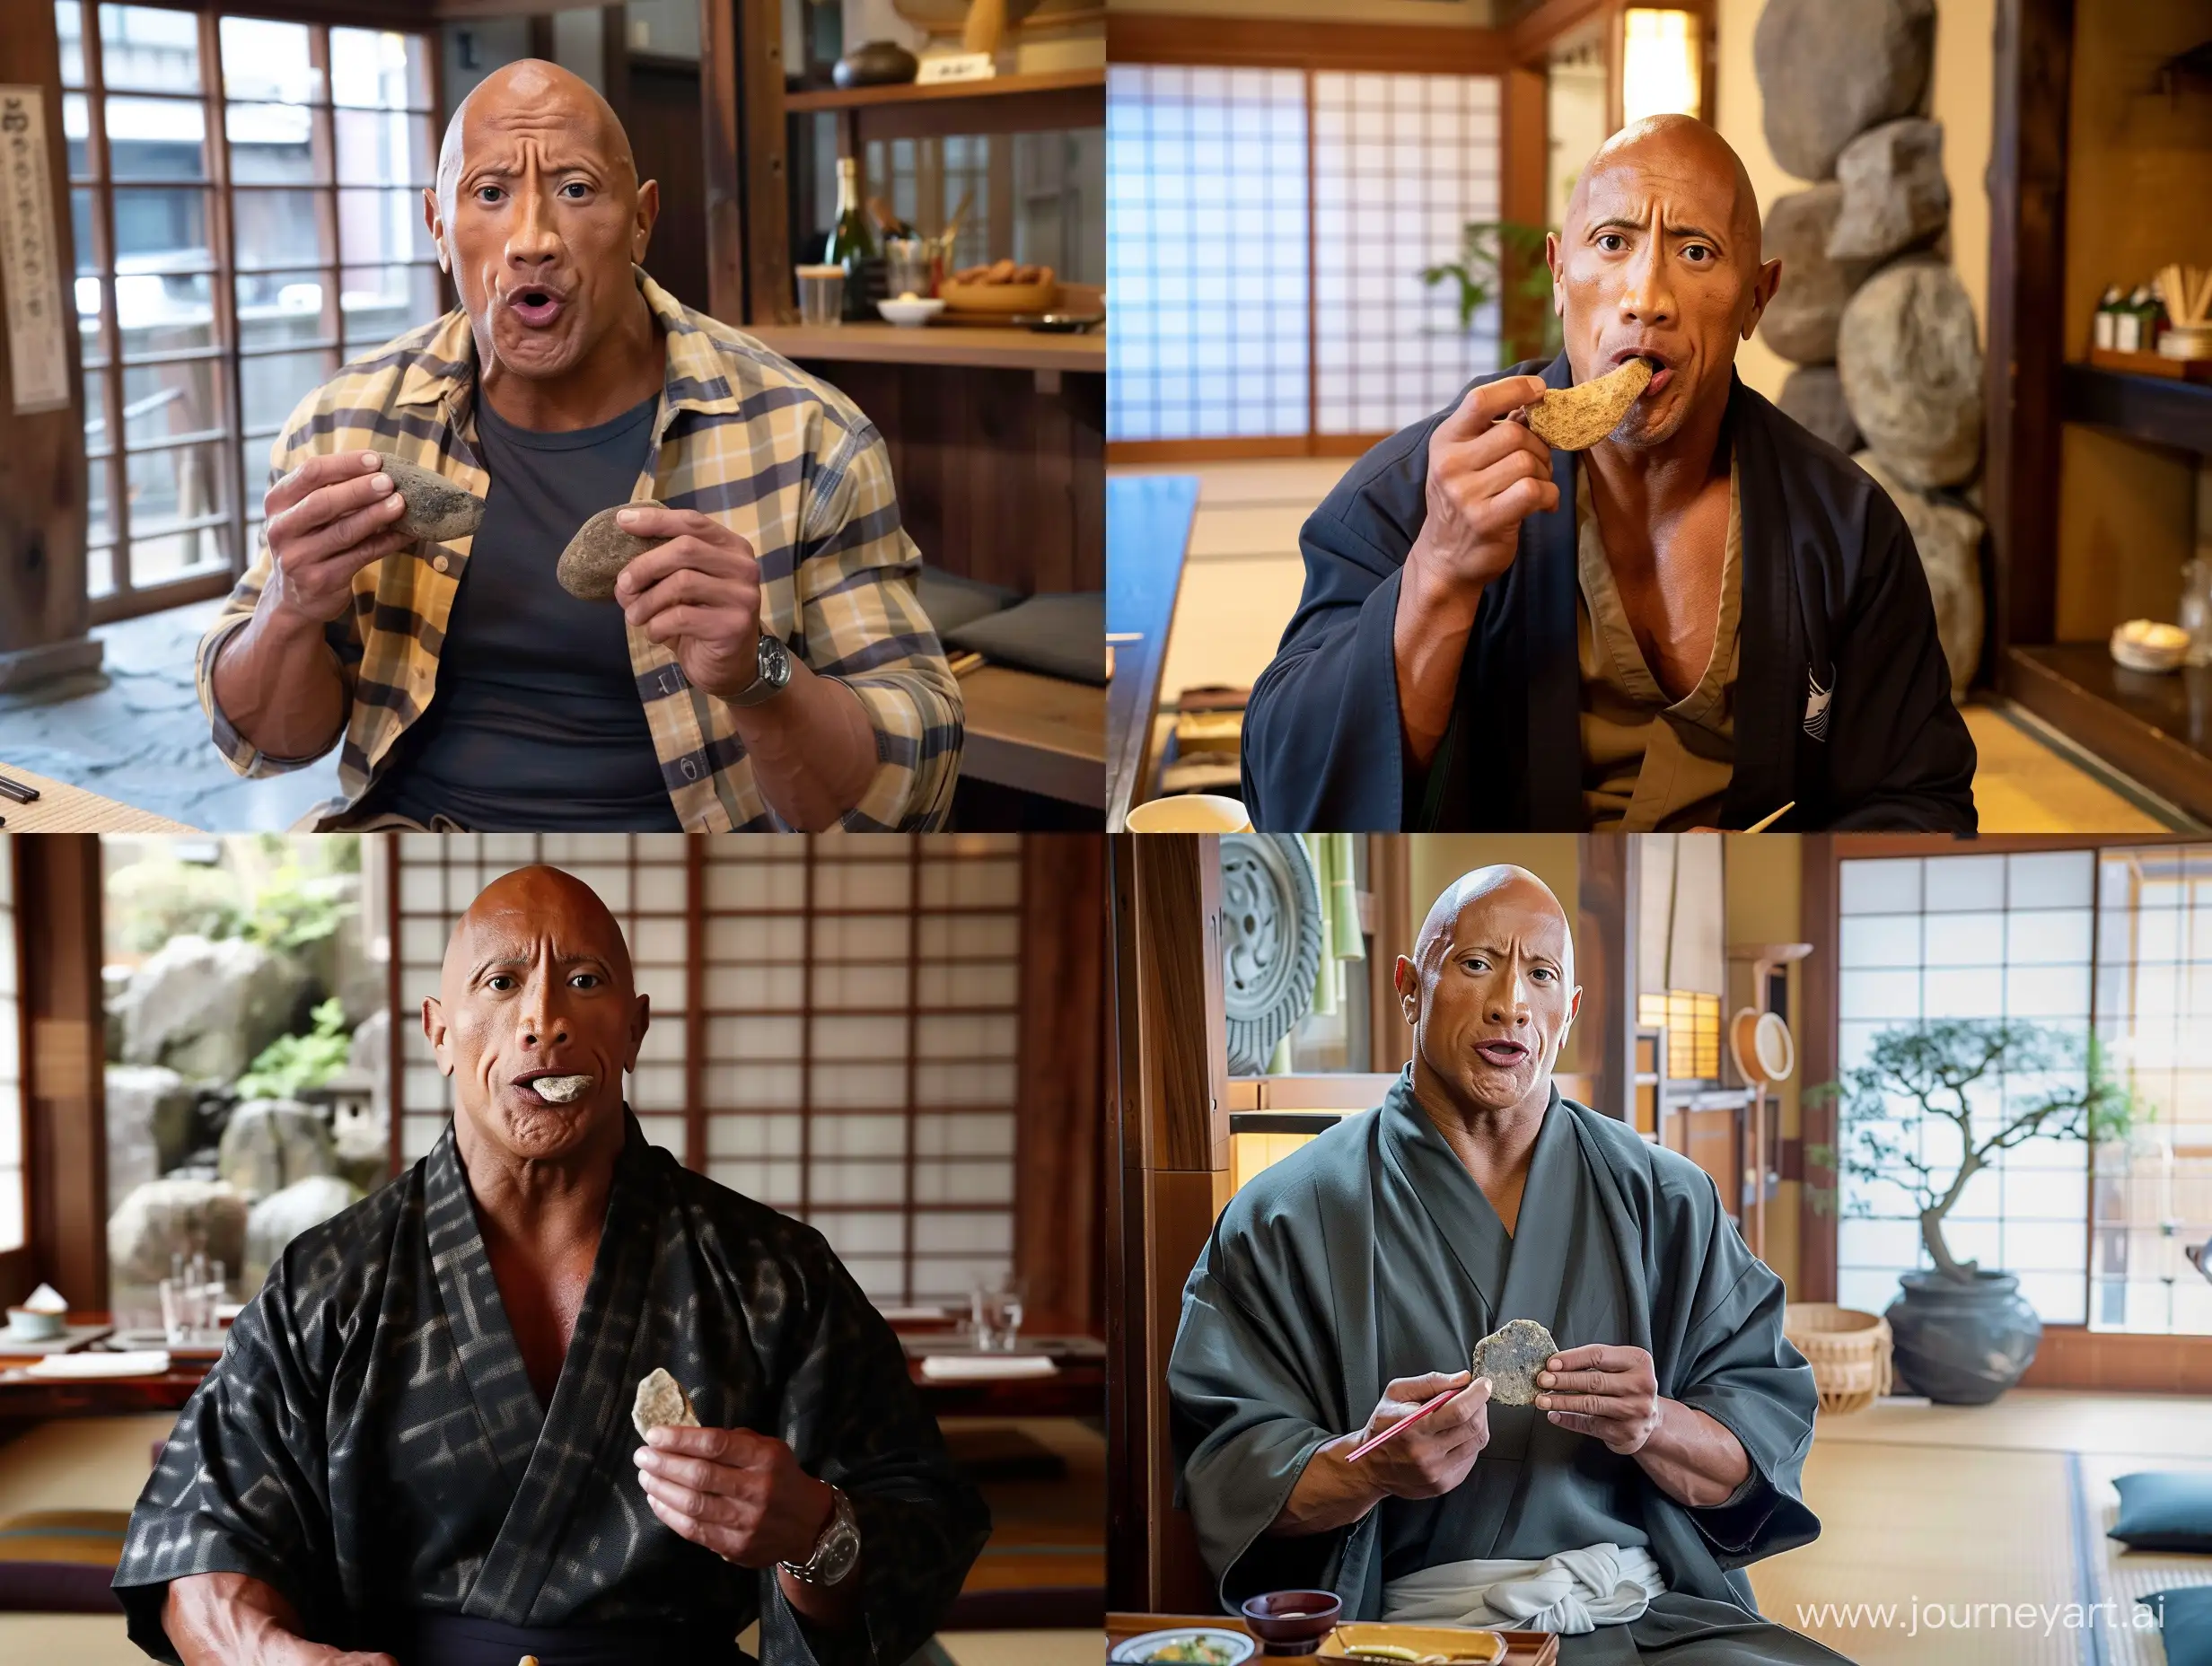 American actor Dwayne Johnson is sitting in a Japanese restaurant and eating rocks